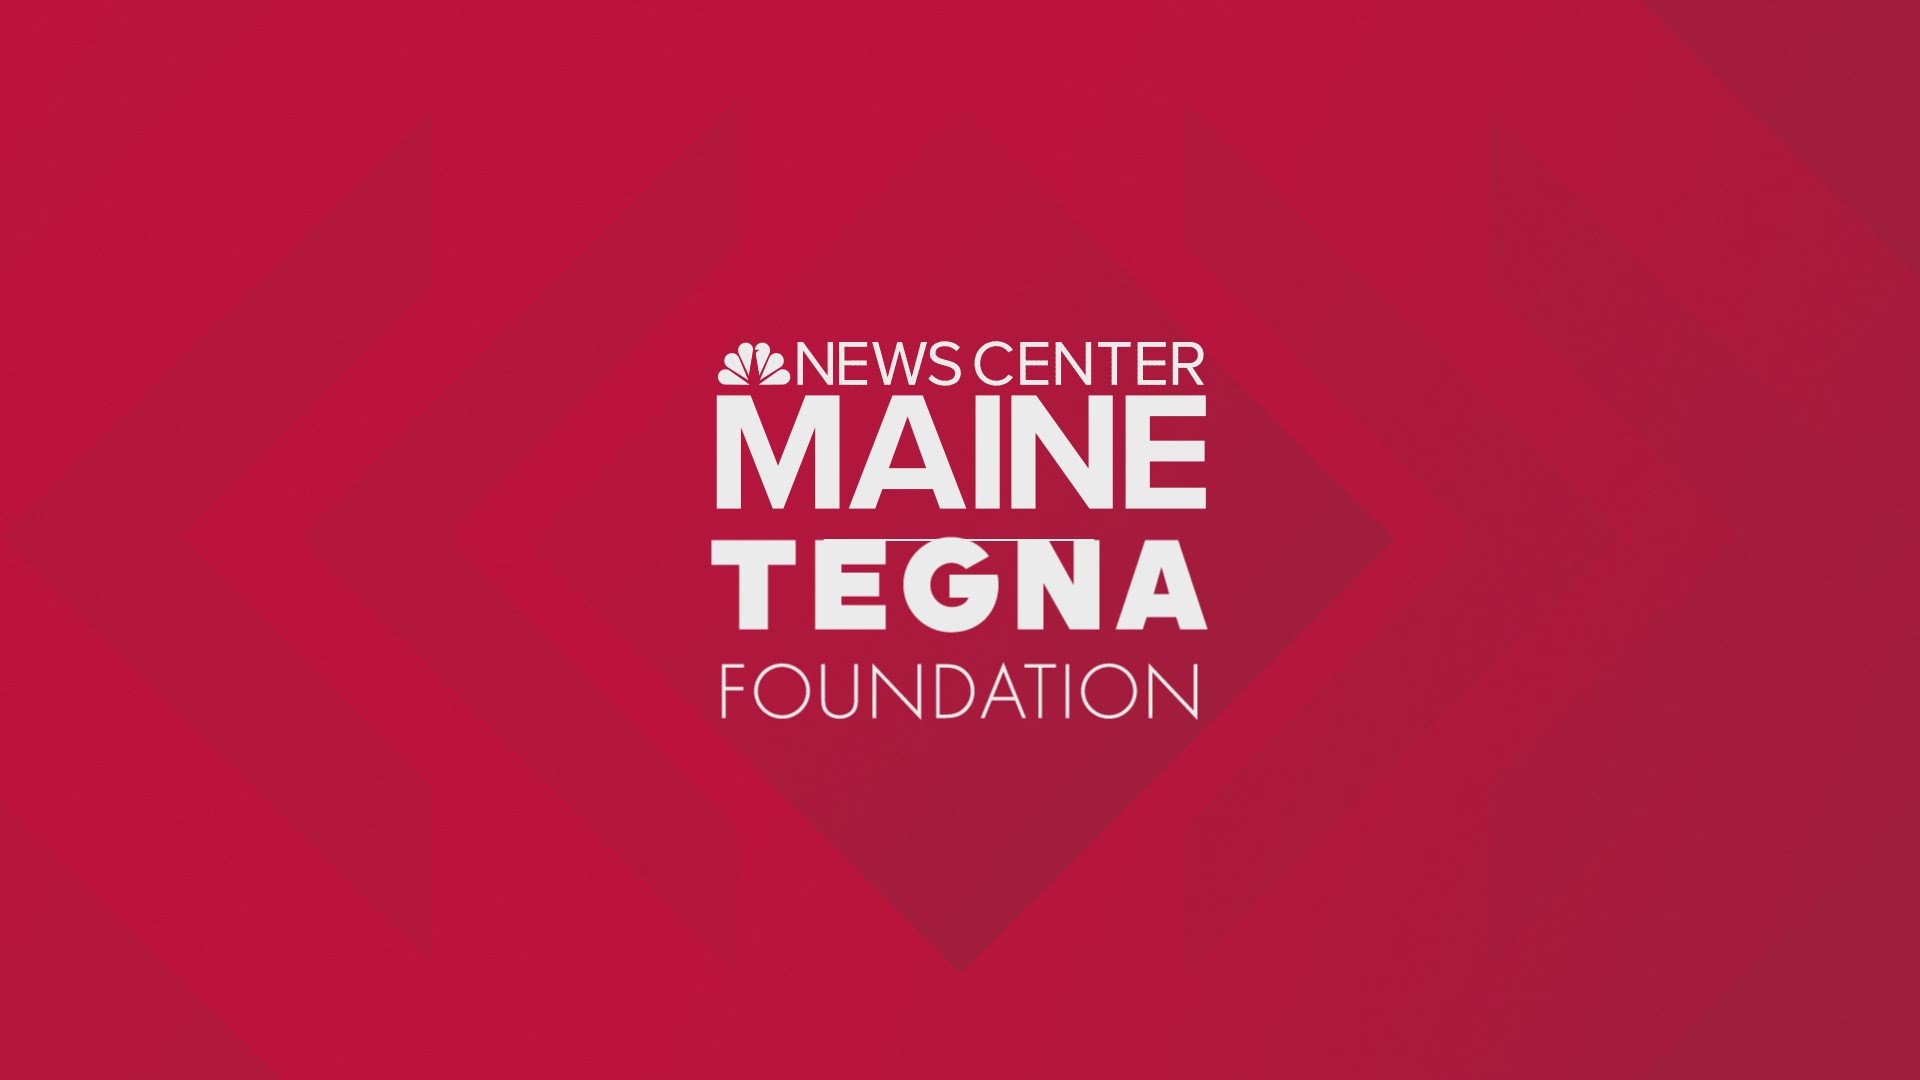 TEGNA Foundation and NCM are accepting 2021 grant proposals from nonprofits that address food insecurity or the mental health and well-being of children.